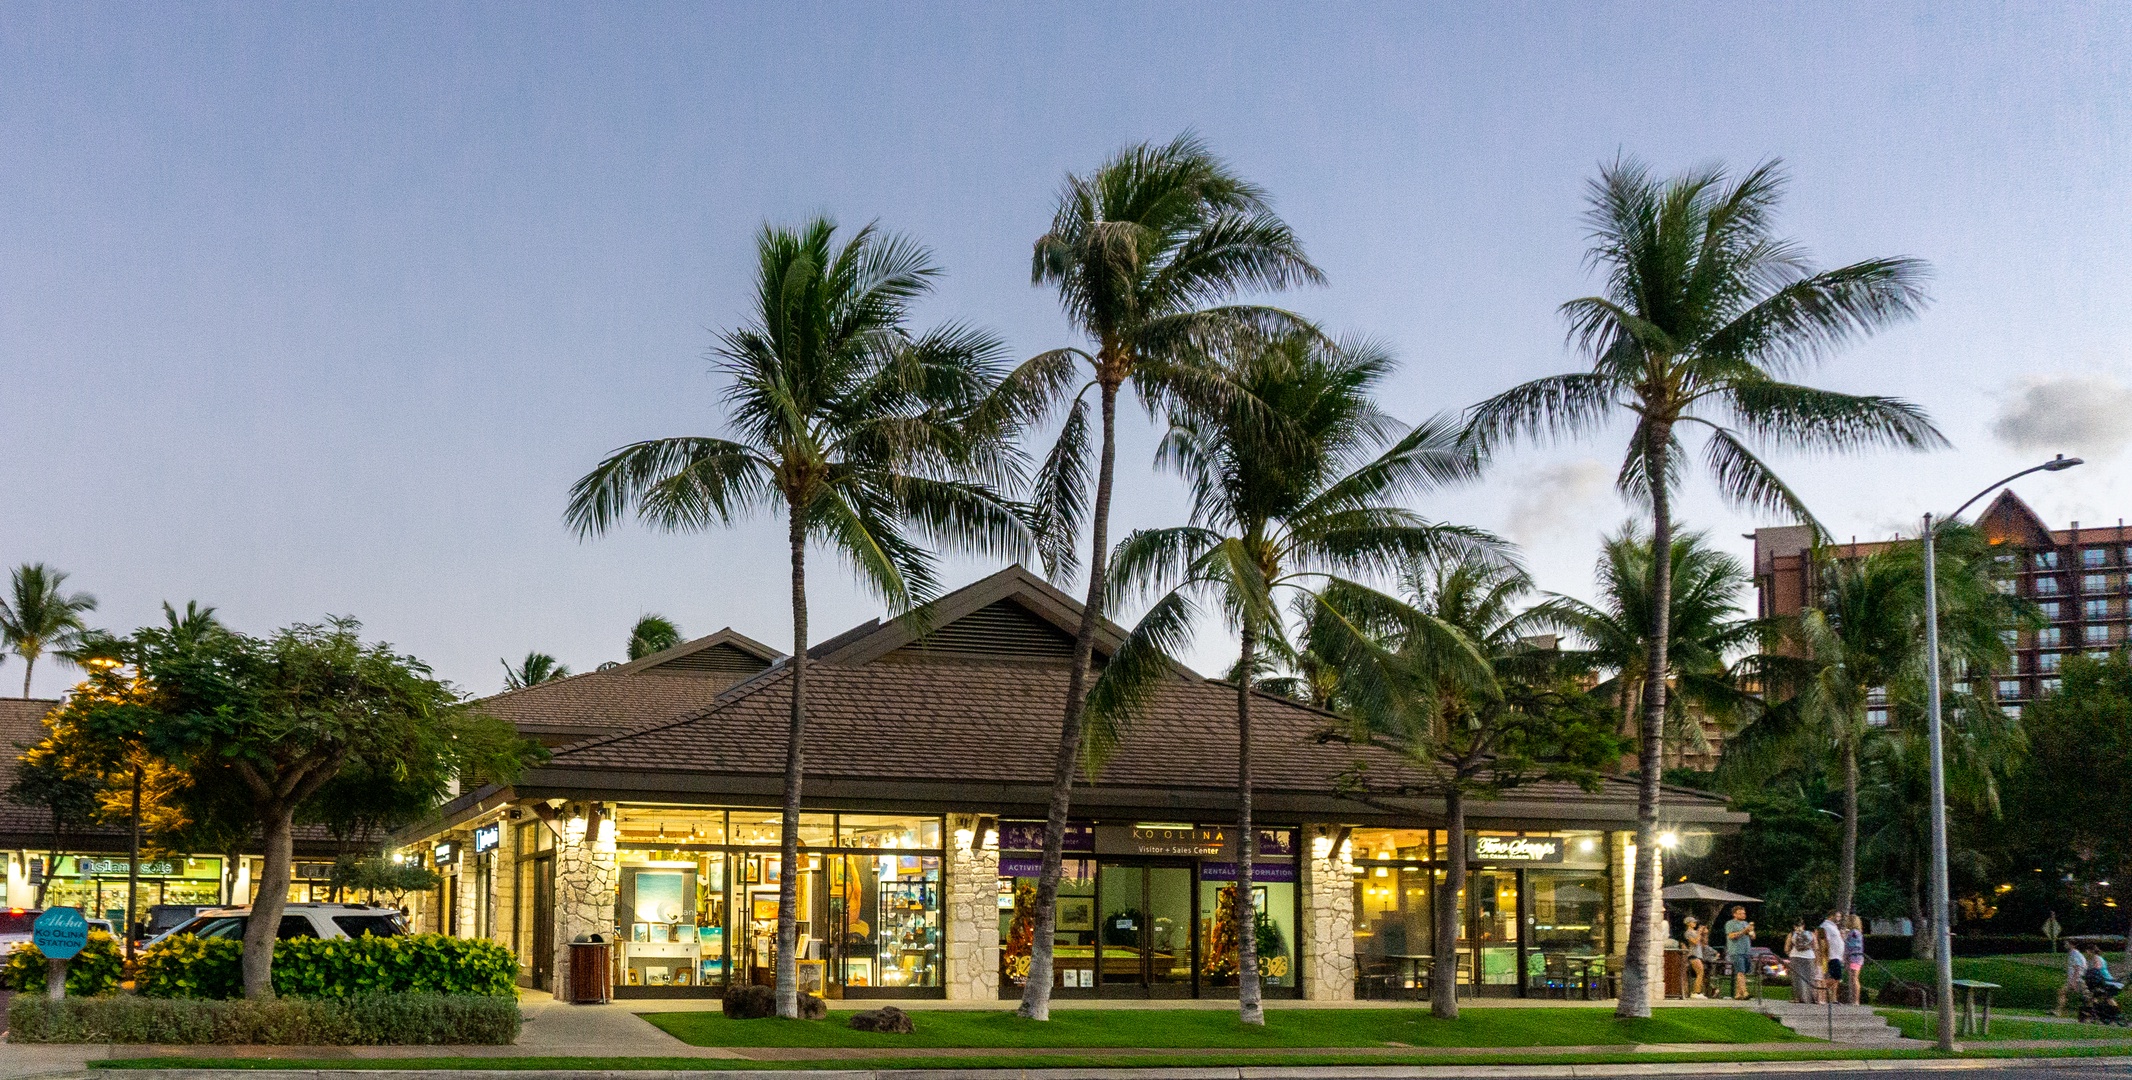 Kapolei Vacation Rentals, Coconut Plantation 1194-3 - The Ko Olina shops for an evening stroll under swaying palms.